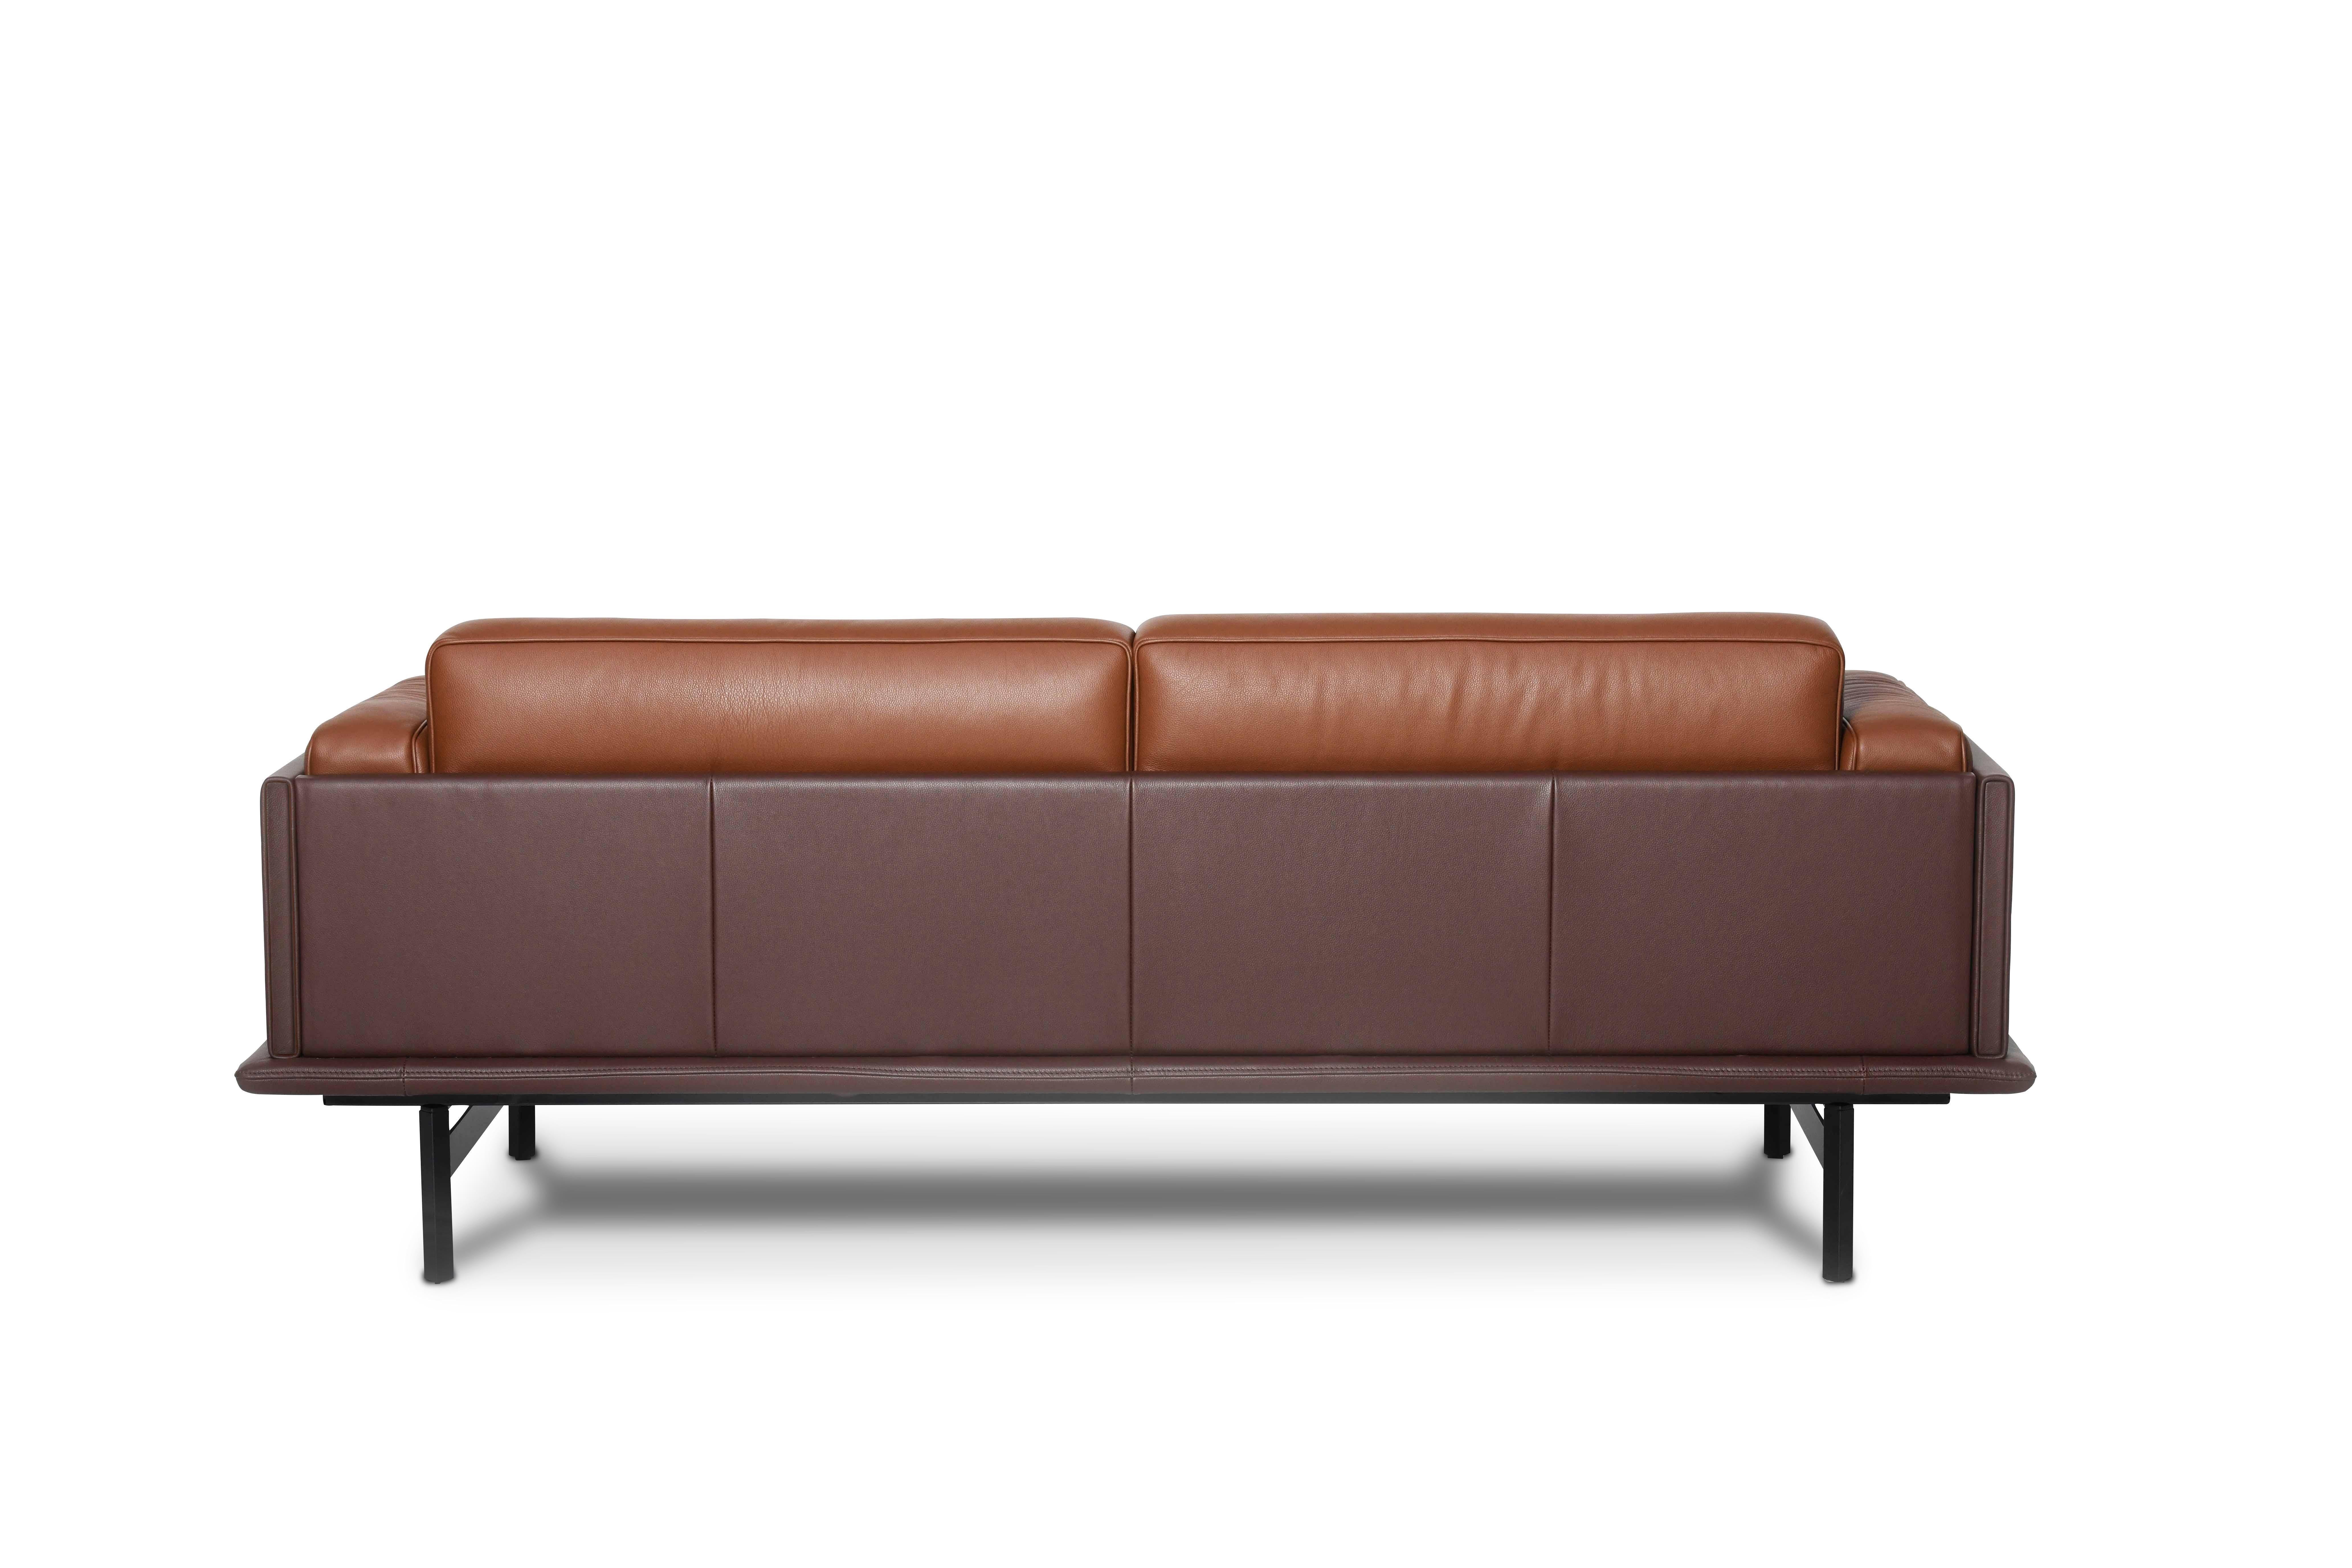 Modern De Sede DS-175 Large Two-Seat Sofa in Hazel Upholstery by Patrick Norguet For Sale